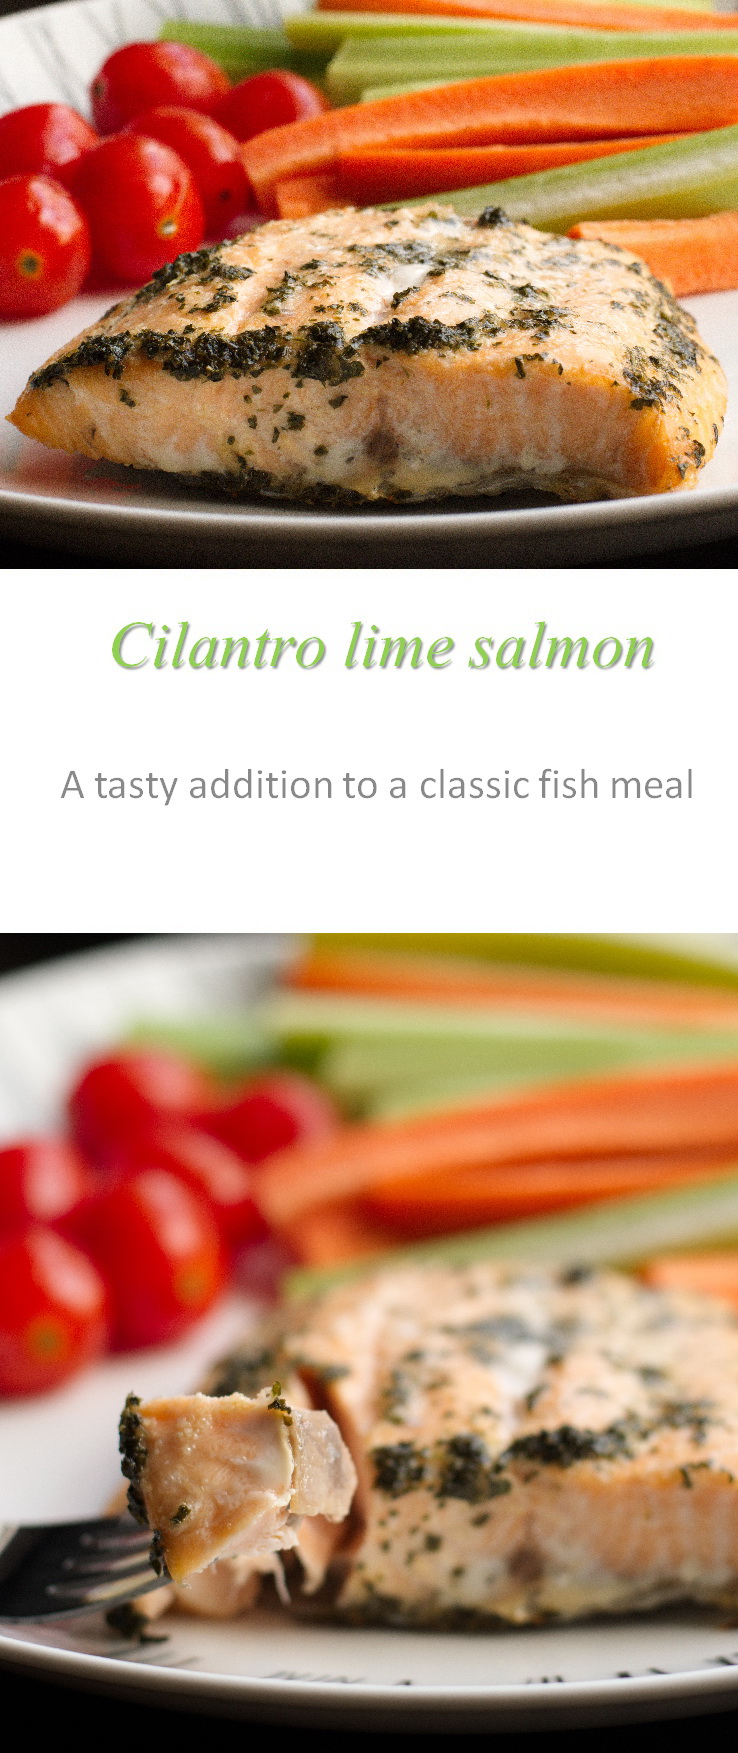 Salmon marinated with cilantro and lime makes a tasty cilantro lime salmon meal for any time of day! #salmon